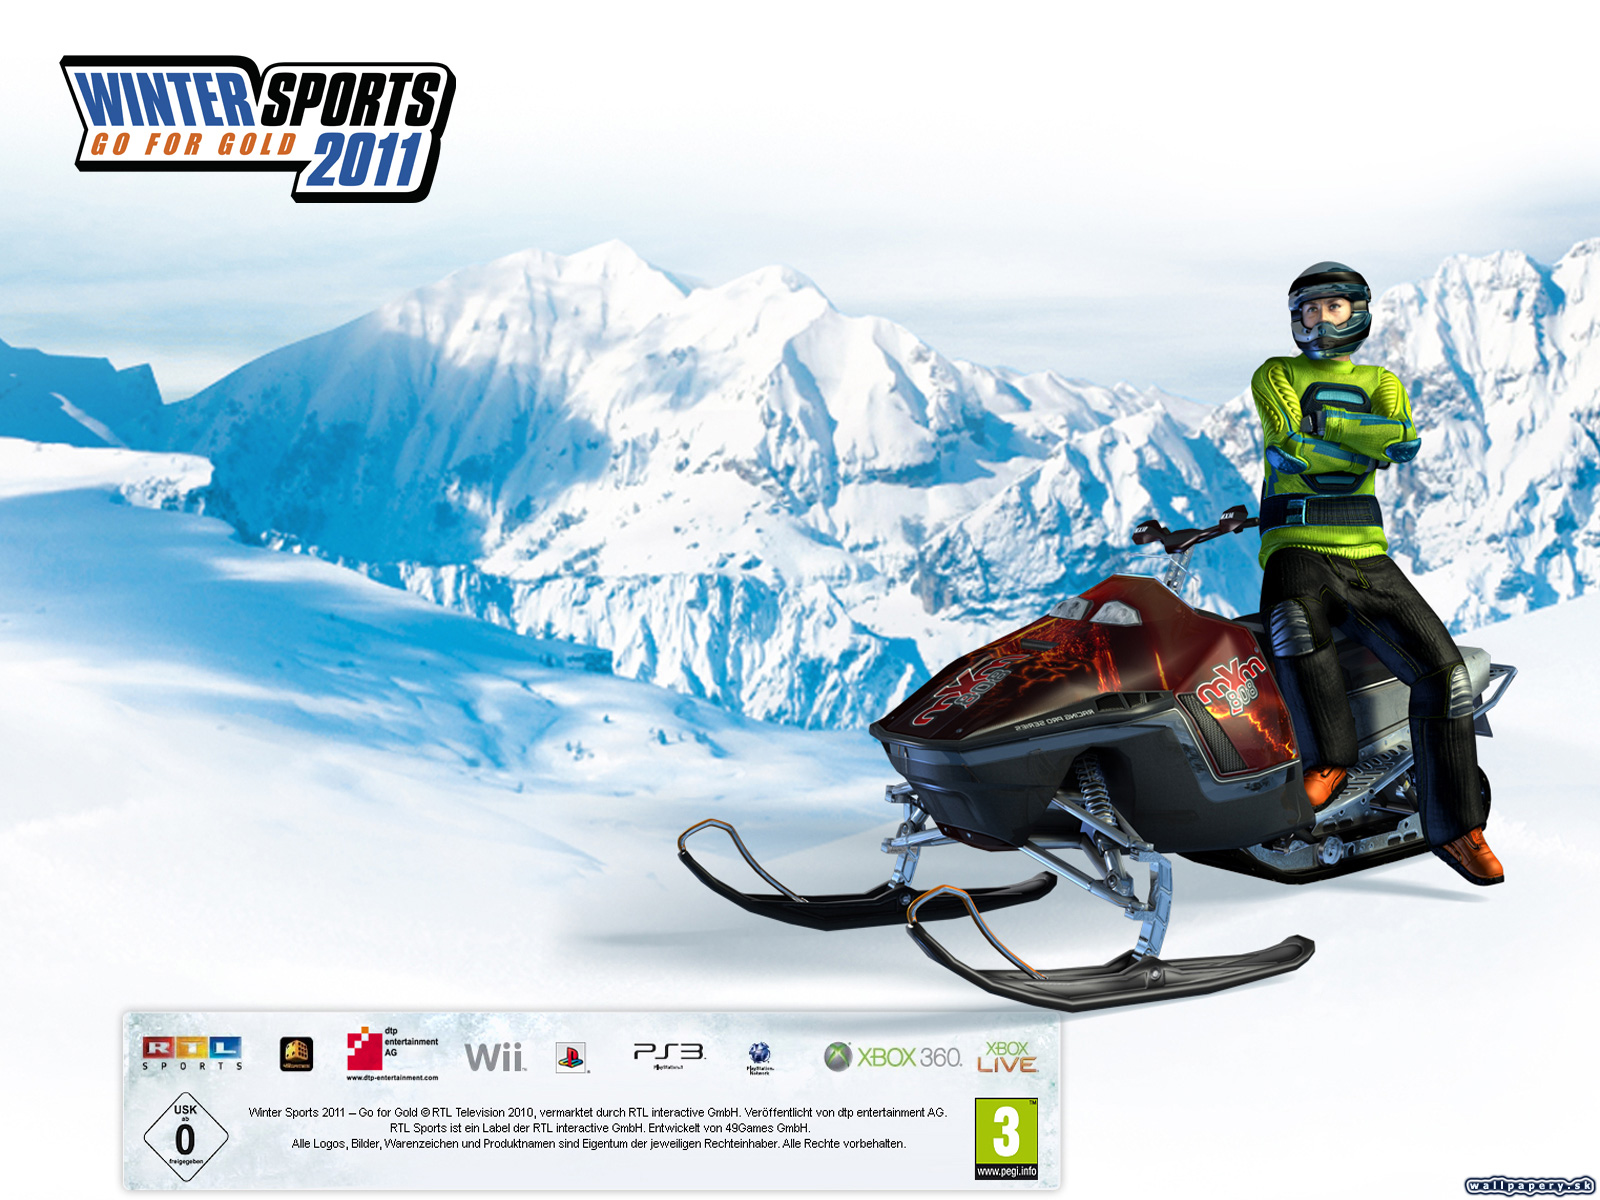 Winter Sports 2011: Go for Gold - wallpaper 4